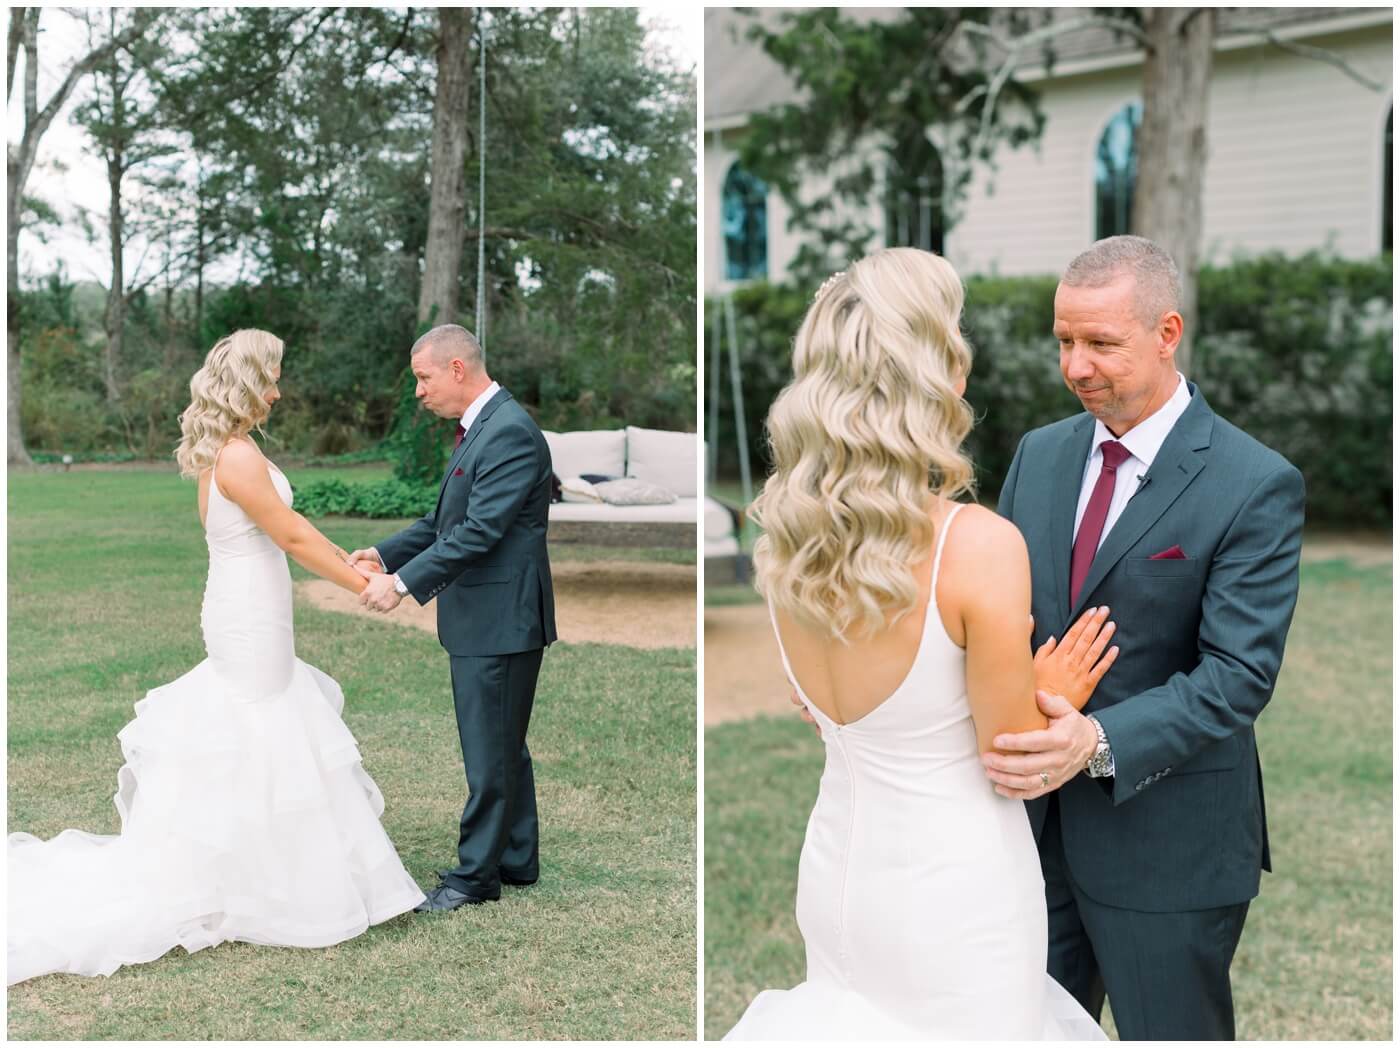 Houston Wedding at The Vine | a father crying during the first look with his daughter